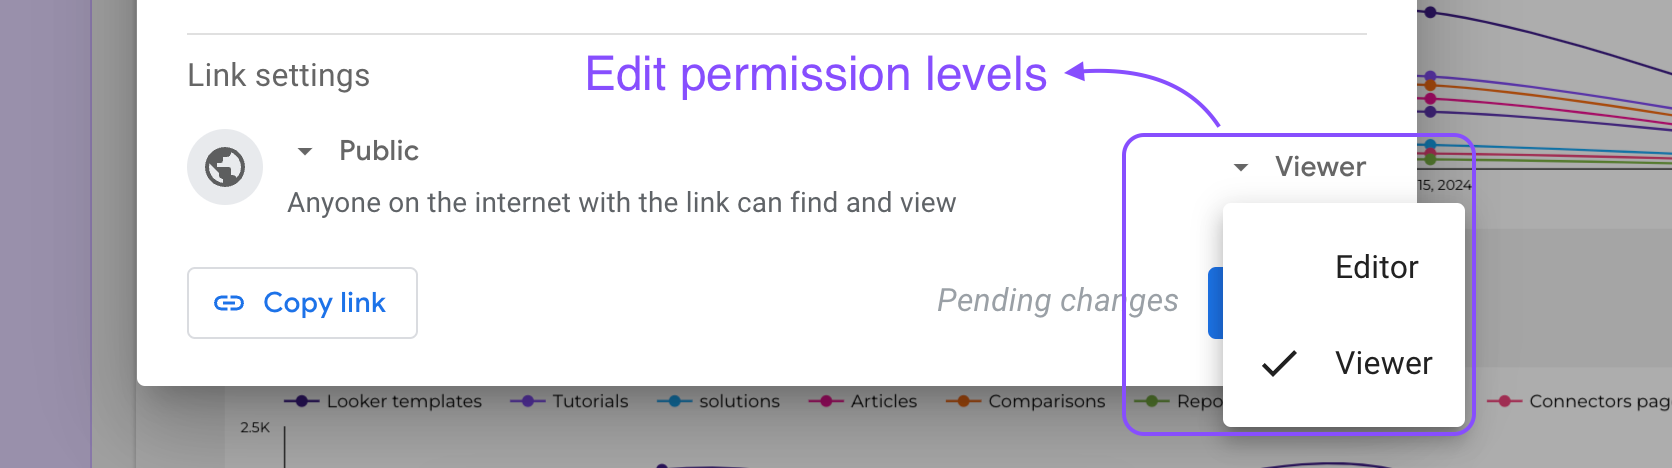 Edit permission levels: view and editor